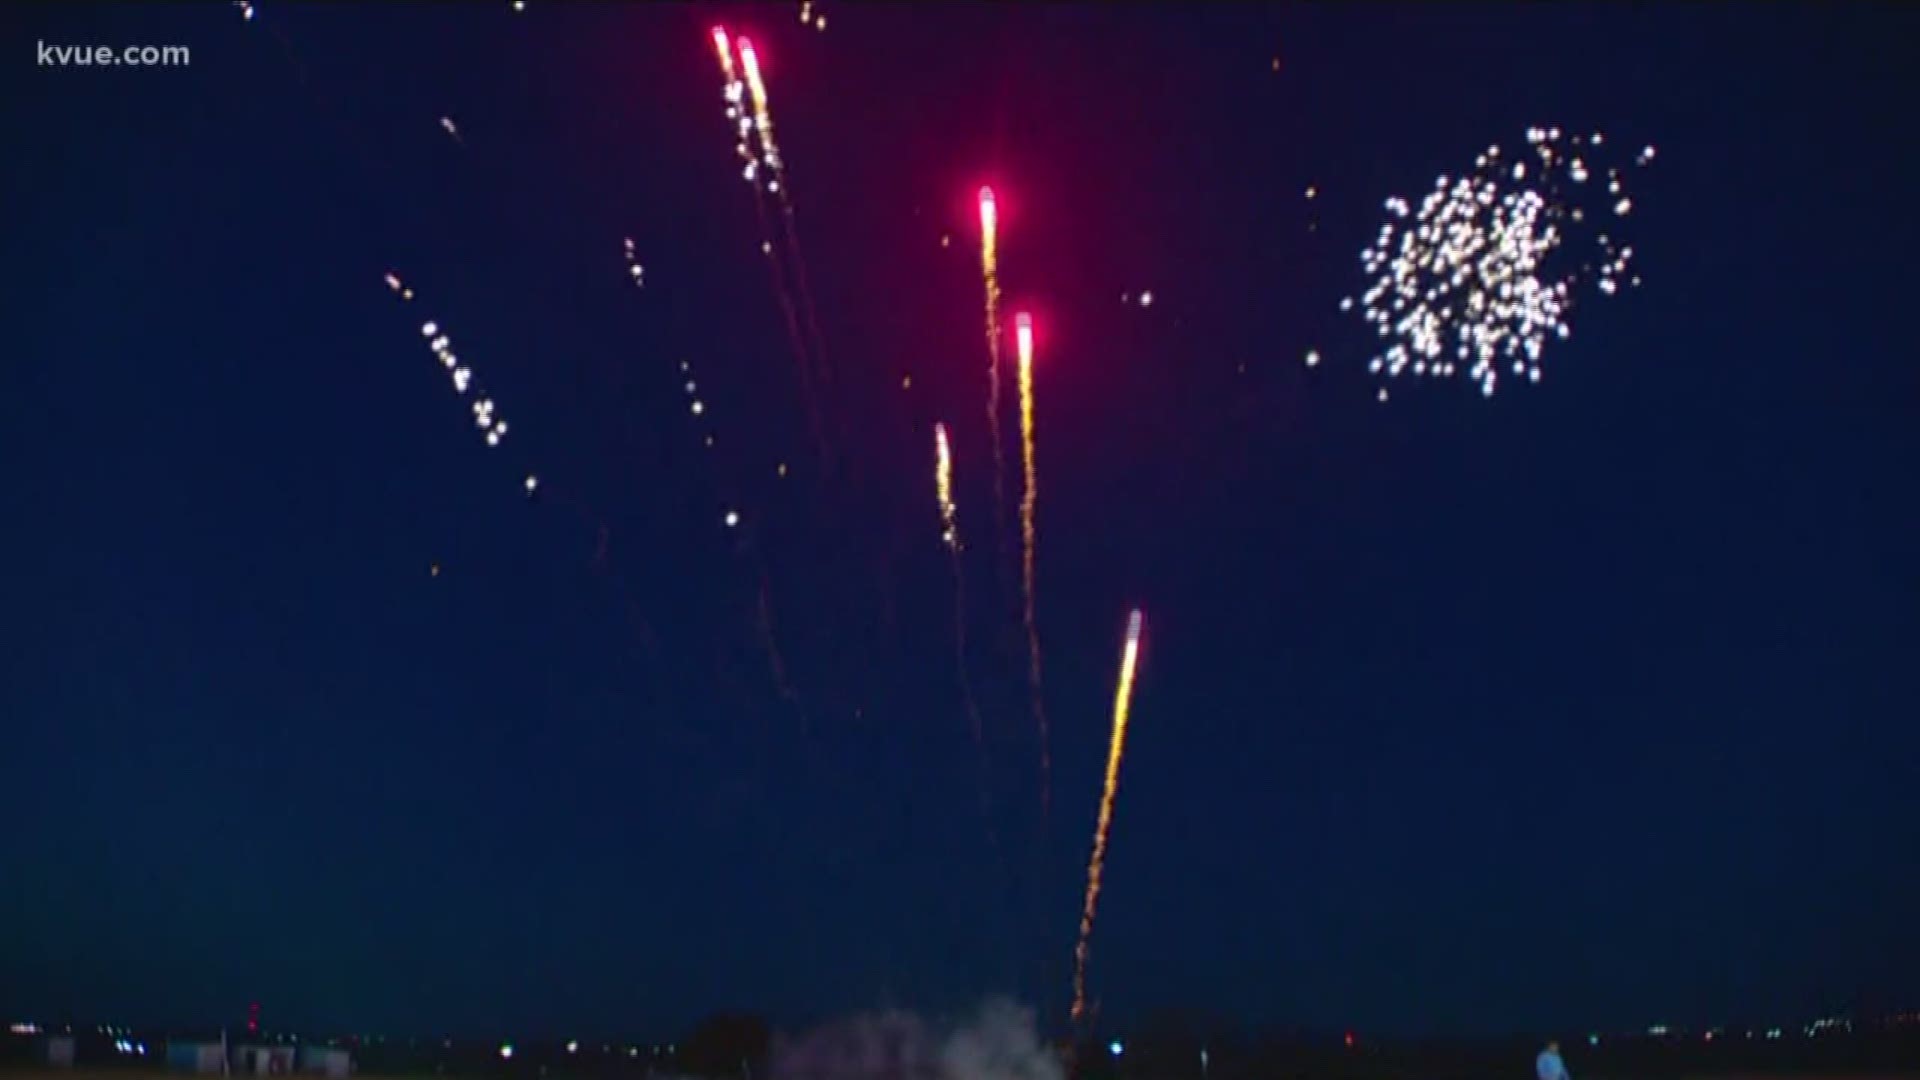 Here's how to safely celebrate New Year's in Central Texas.